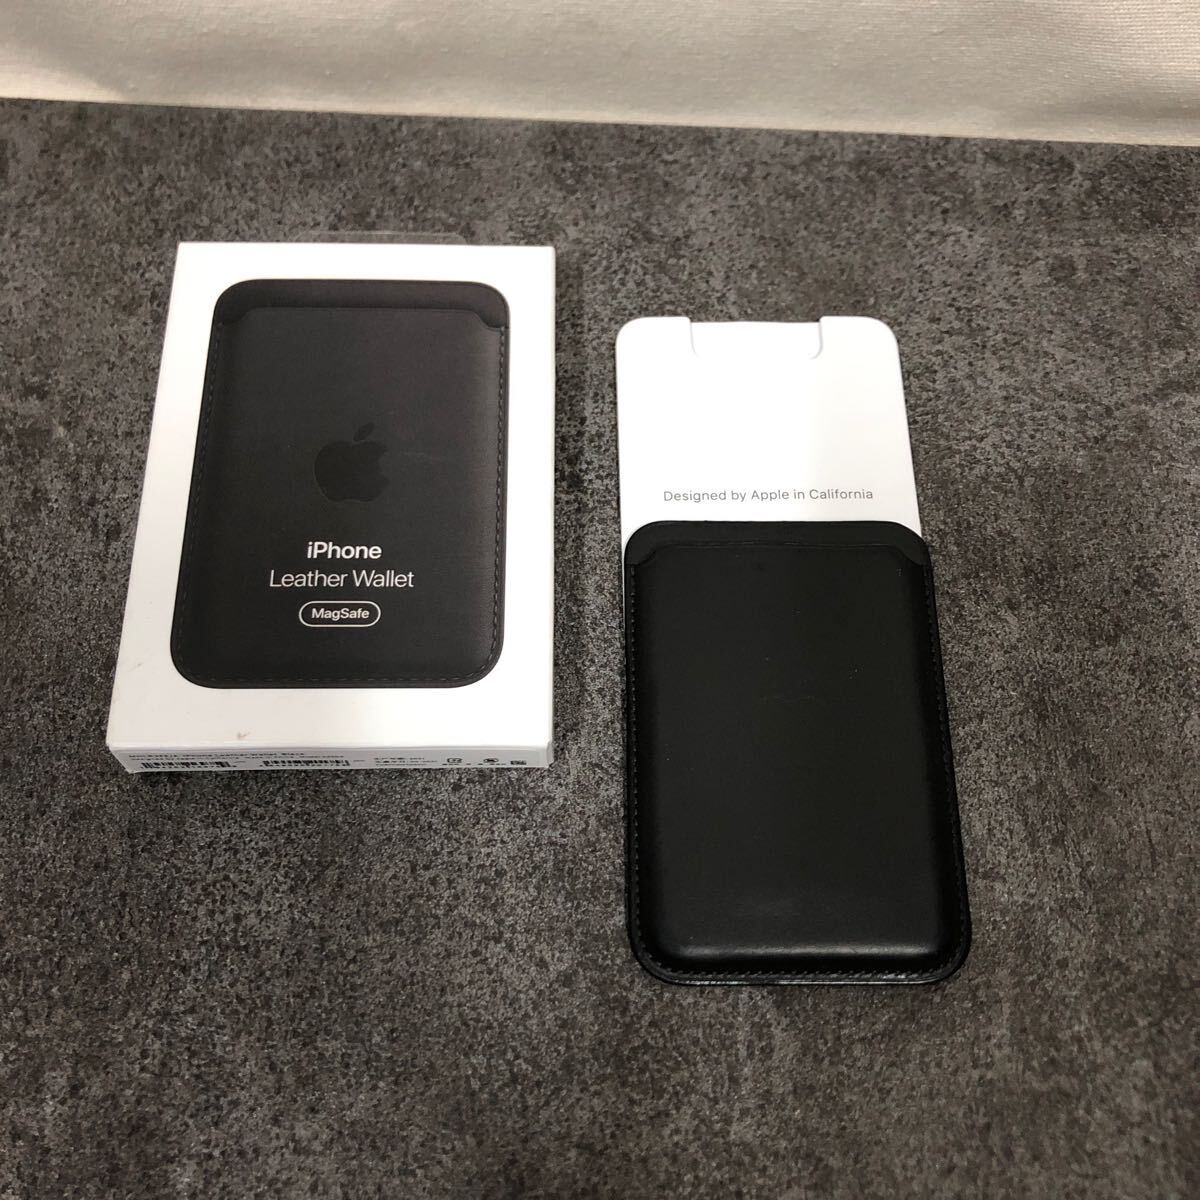 Apple アップル レザーウォレット 中古品 Iphone Leather Wallet MagSafe MHLR3FE/Aの画像2